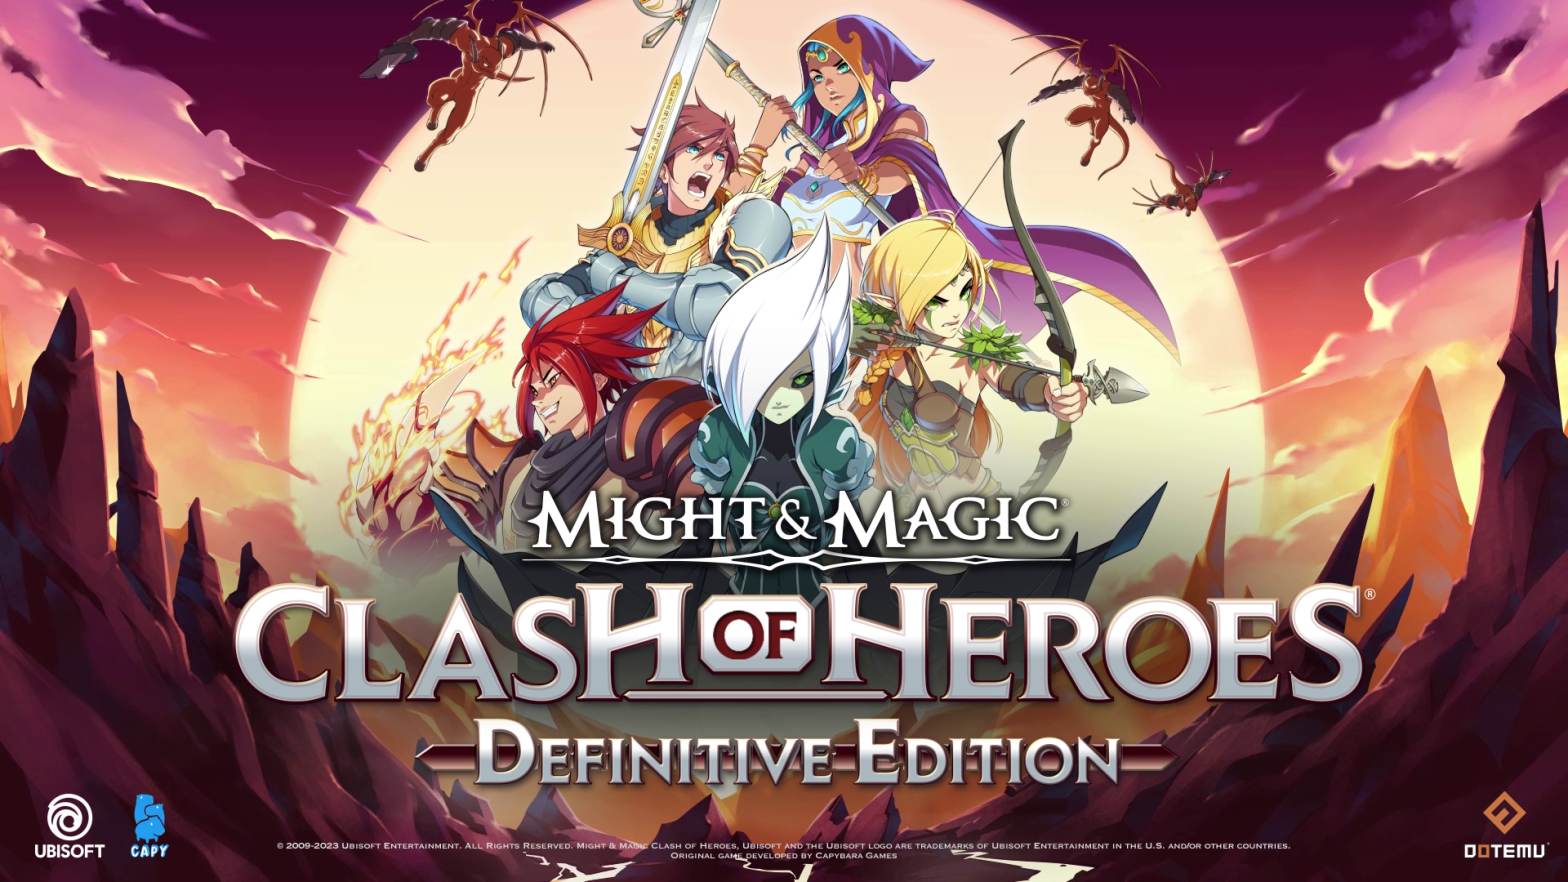 Might & Magic: Clash of Heroes - Definitive Edition Casts a Spell on PC & Consoles This Summer